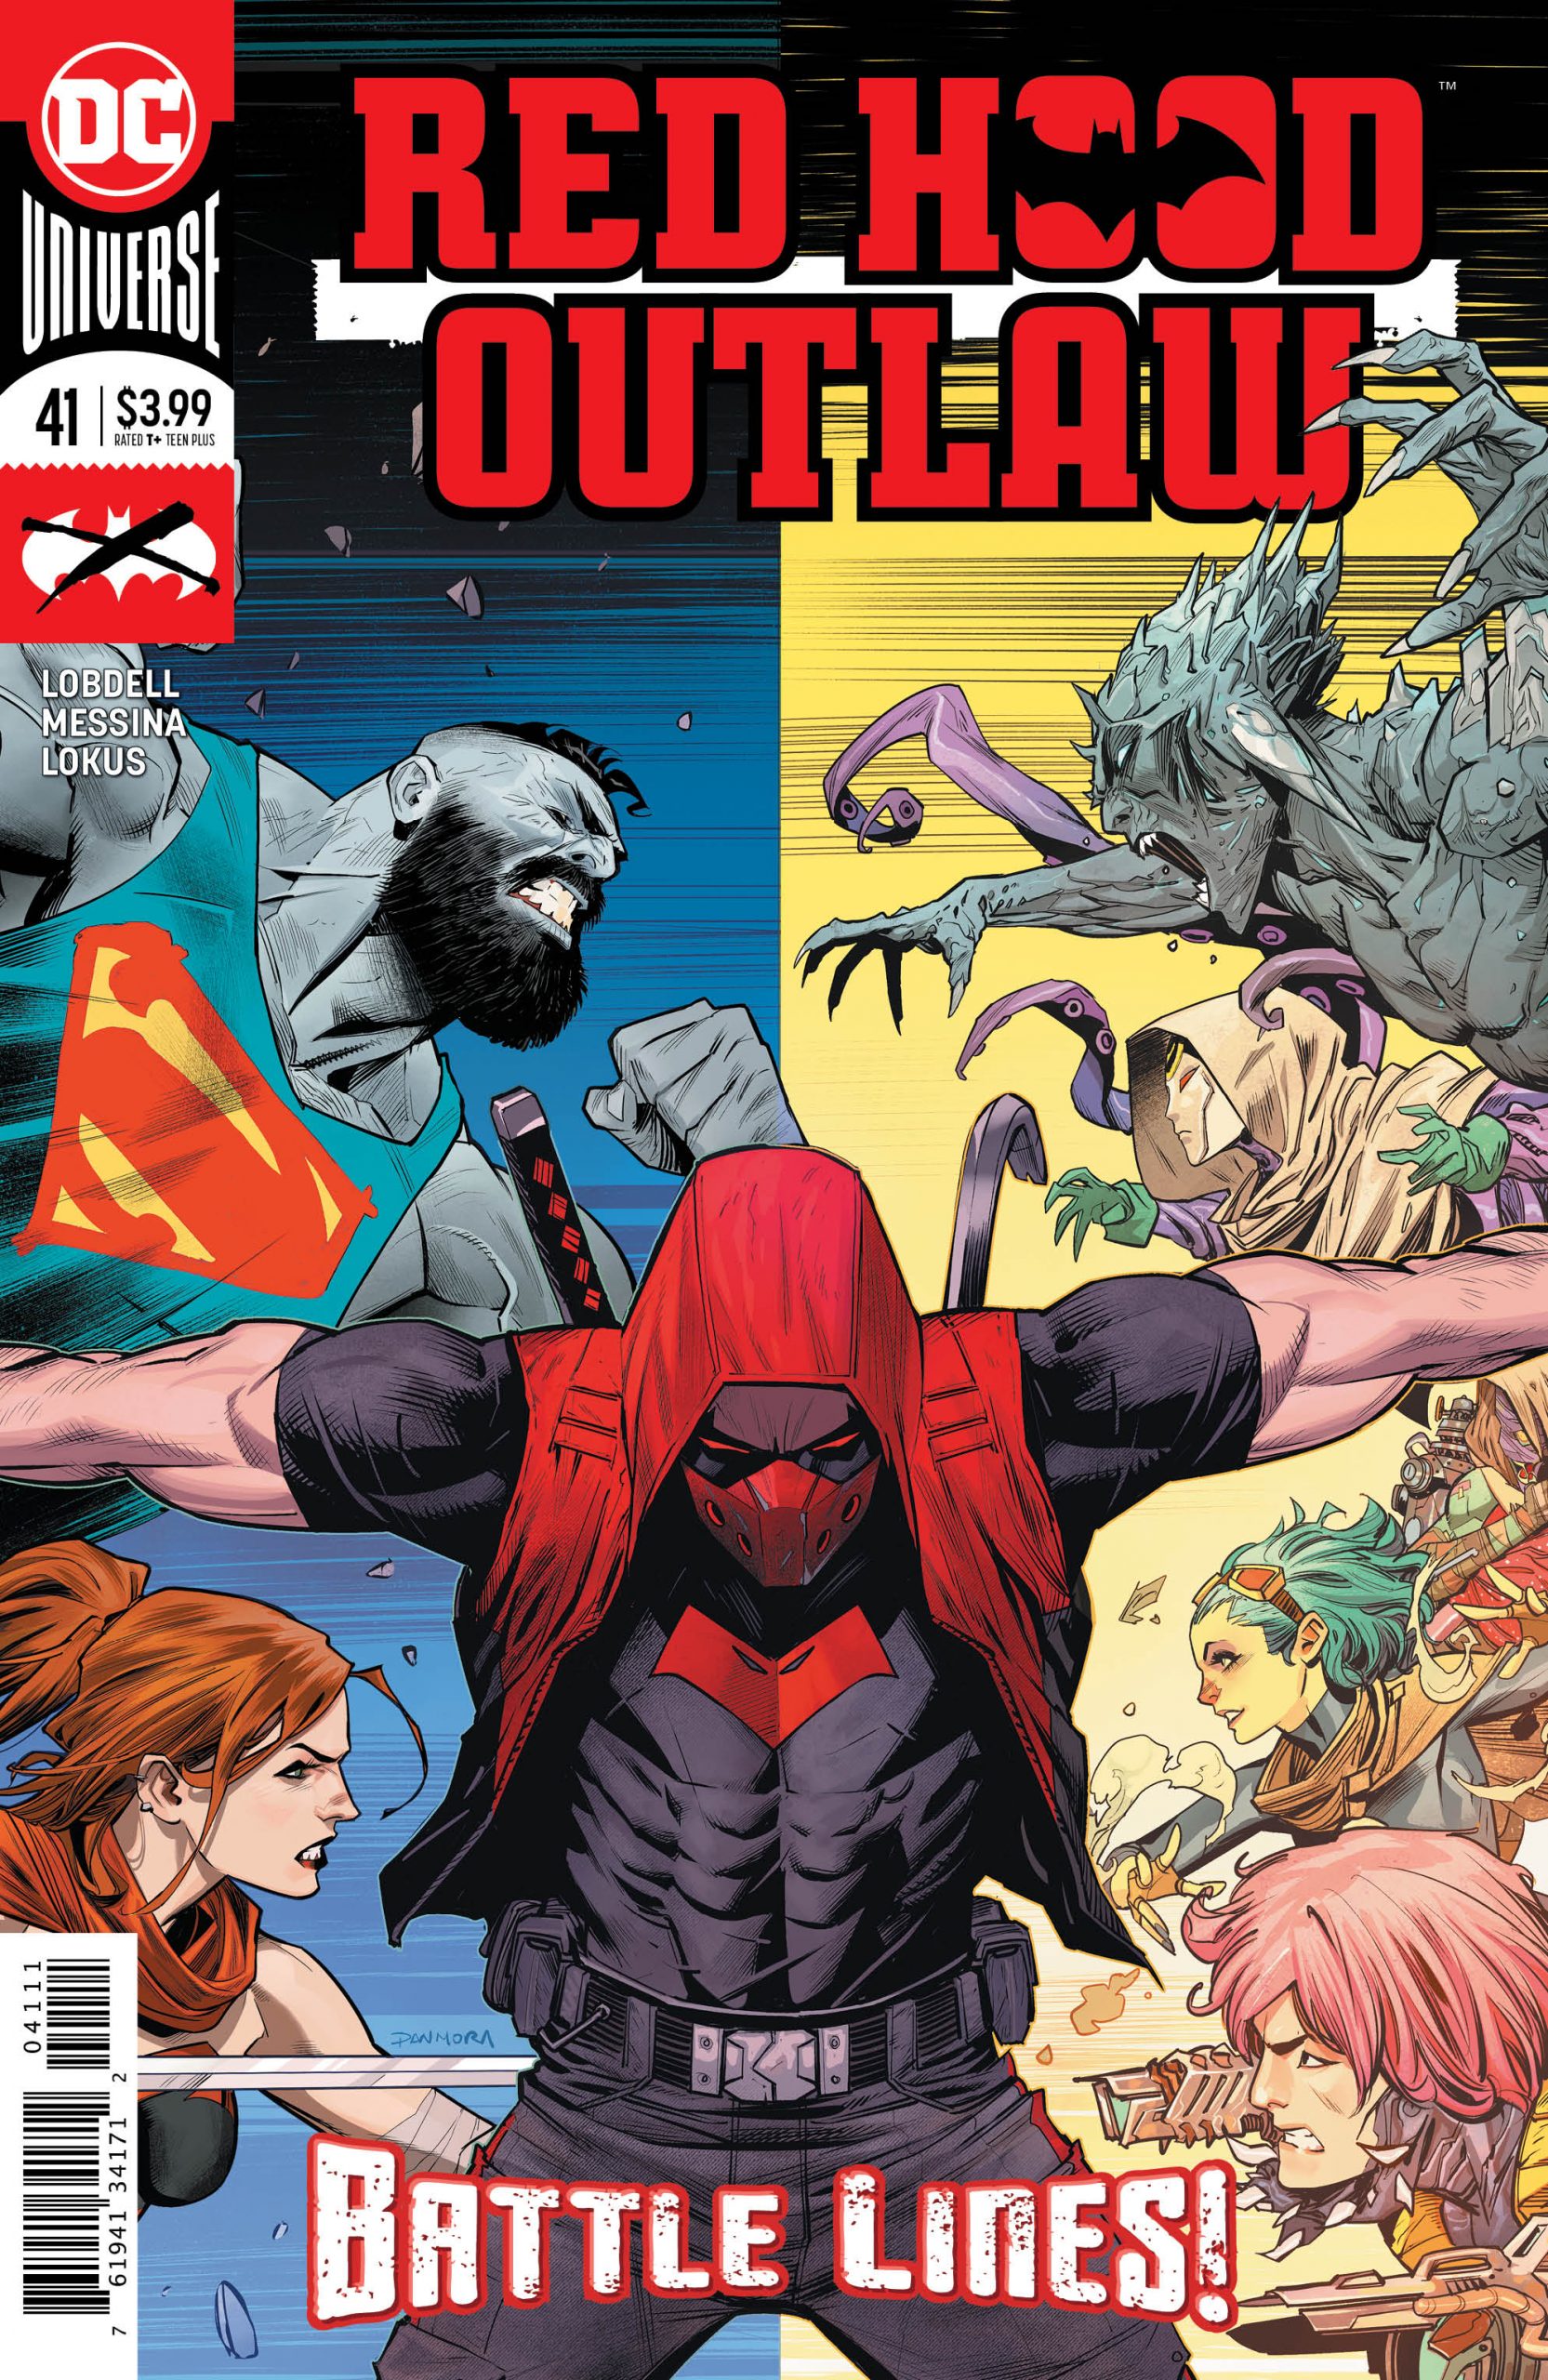 Red Hood Outlaw #41